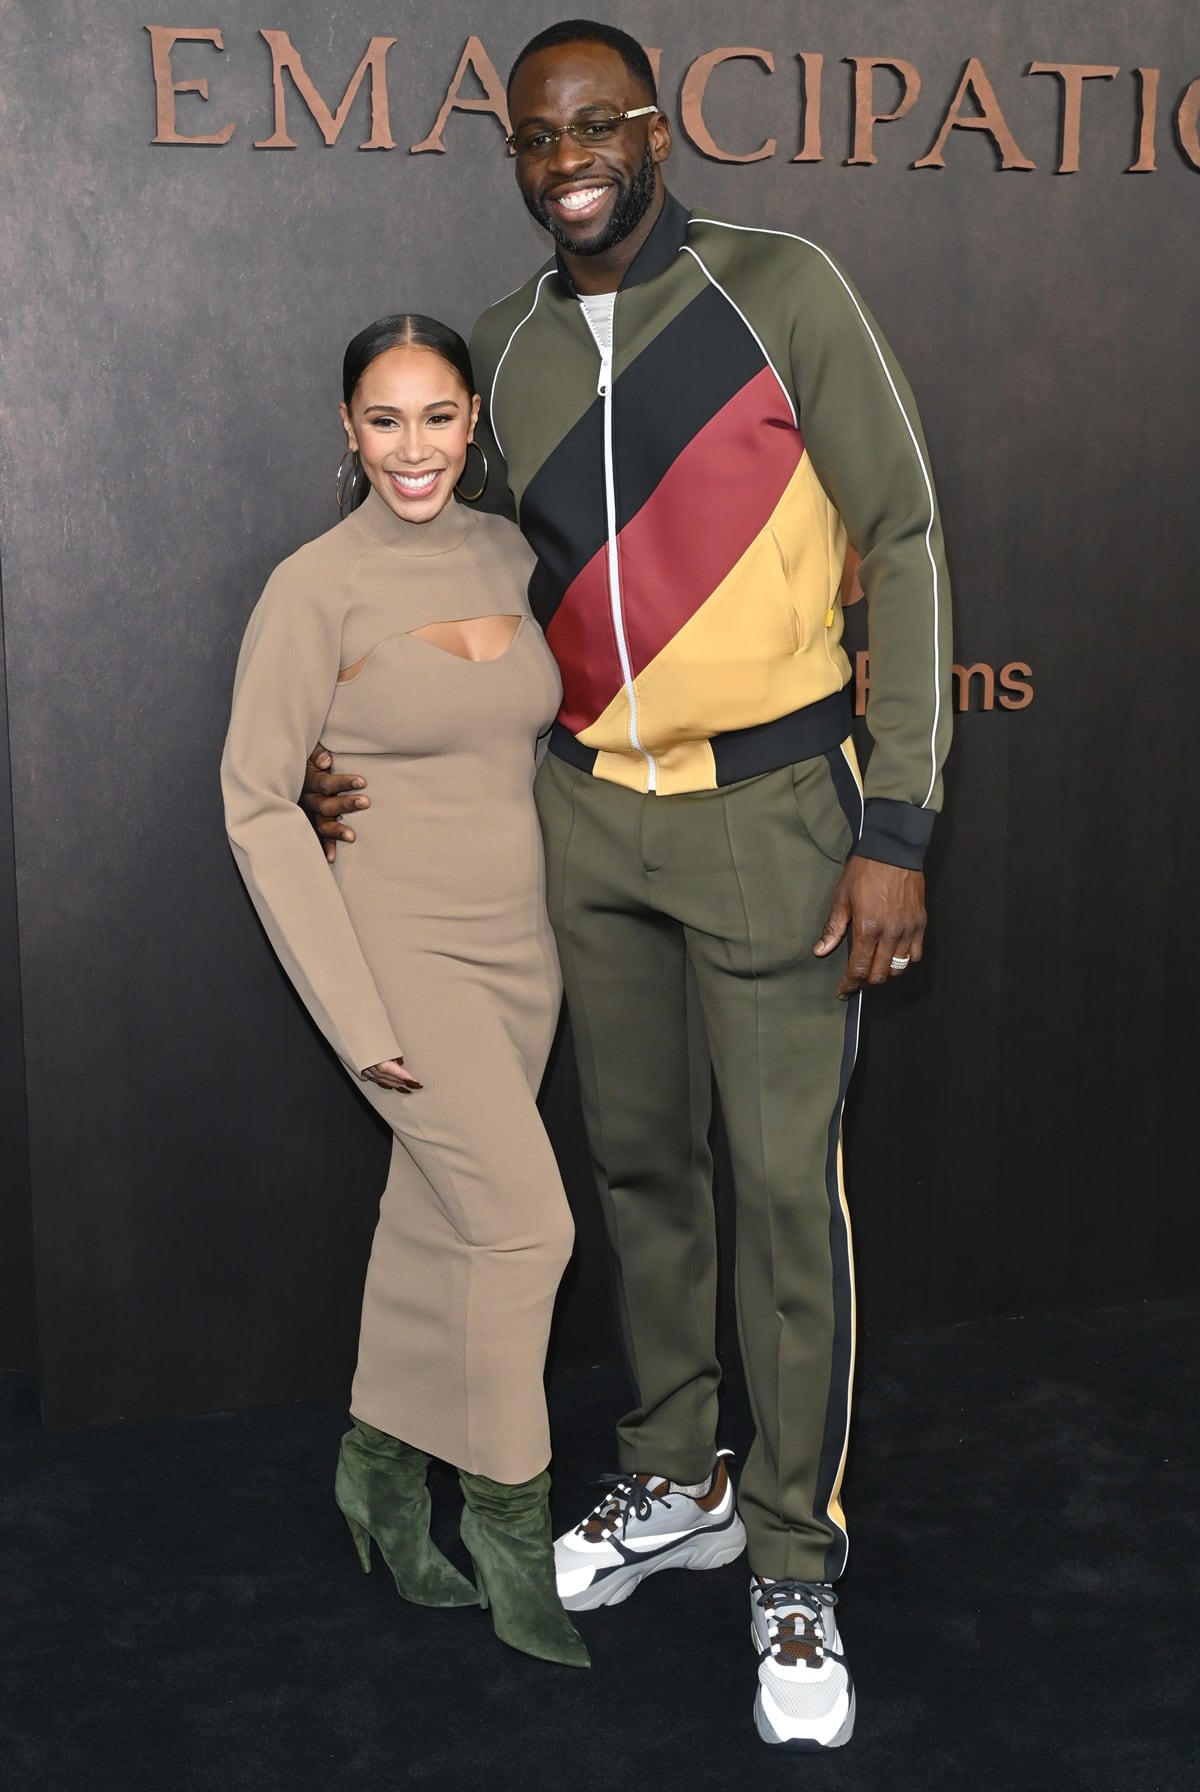 Hazel Renee and Draymond Green met while they were both students at Michigan State University and got married in August 2022